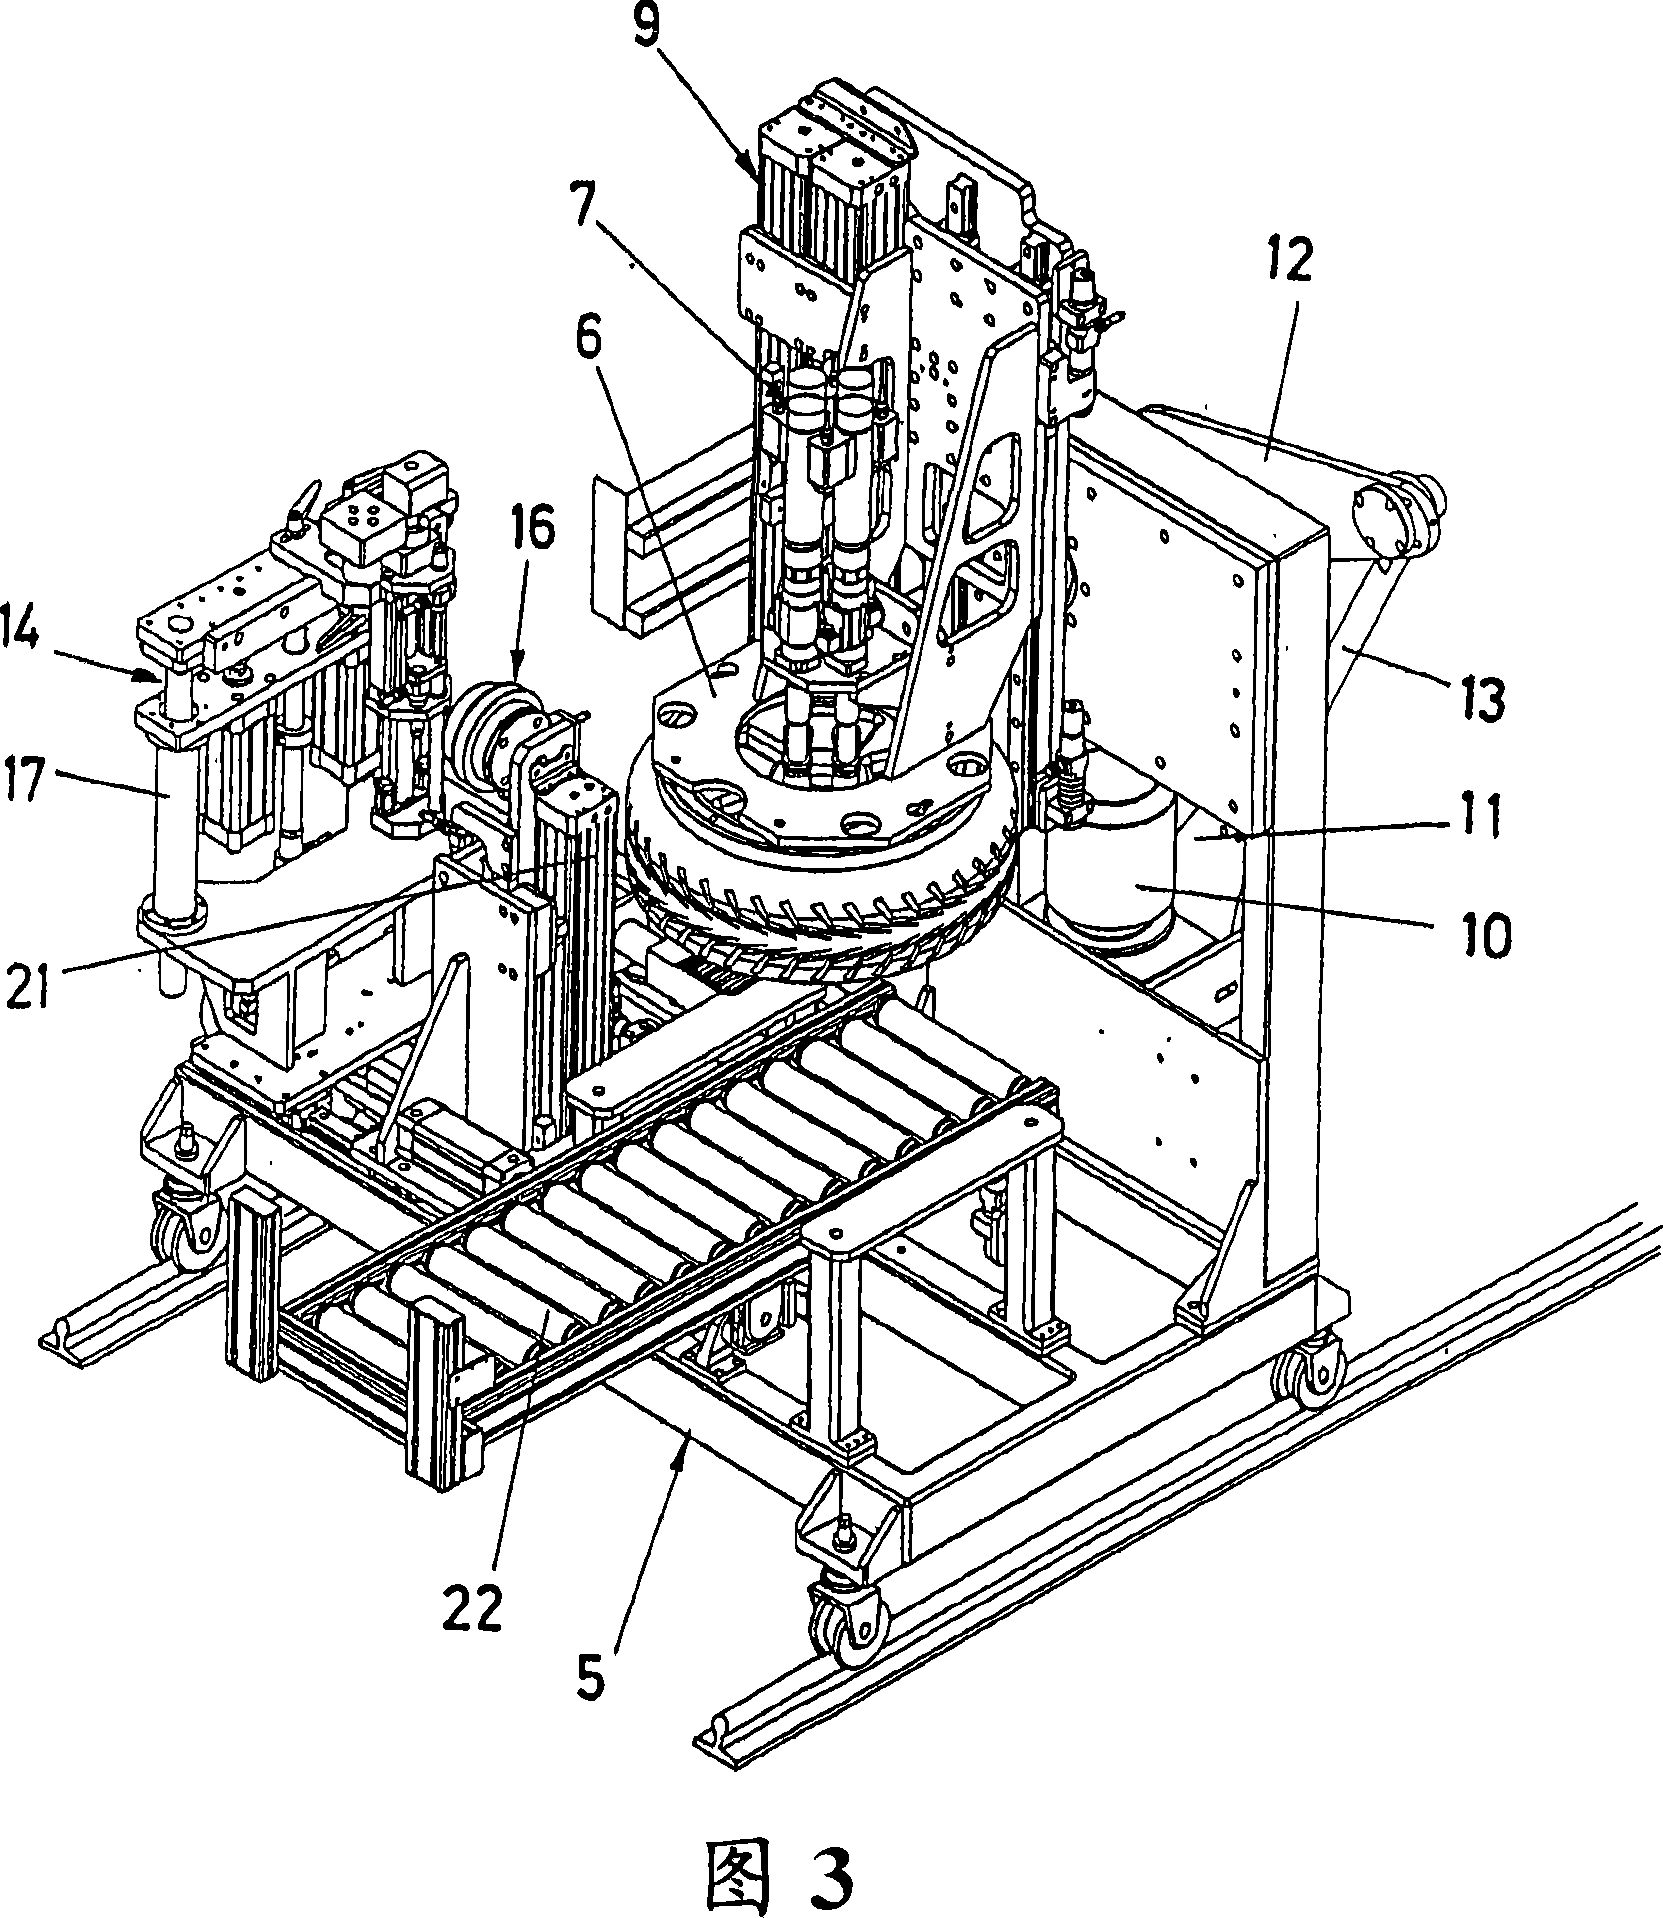 Machine for fixing wheels on vehicles